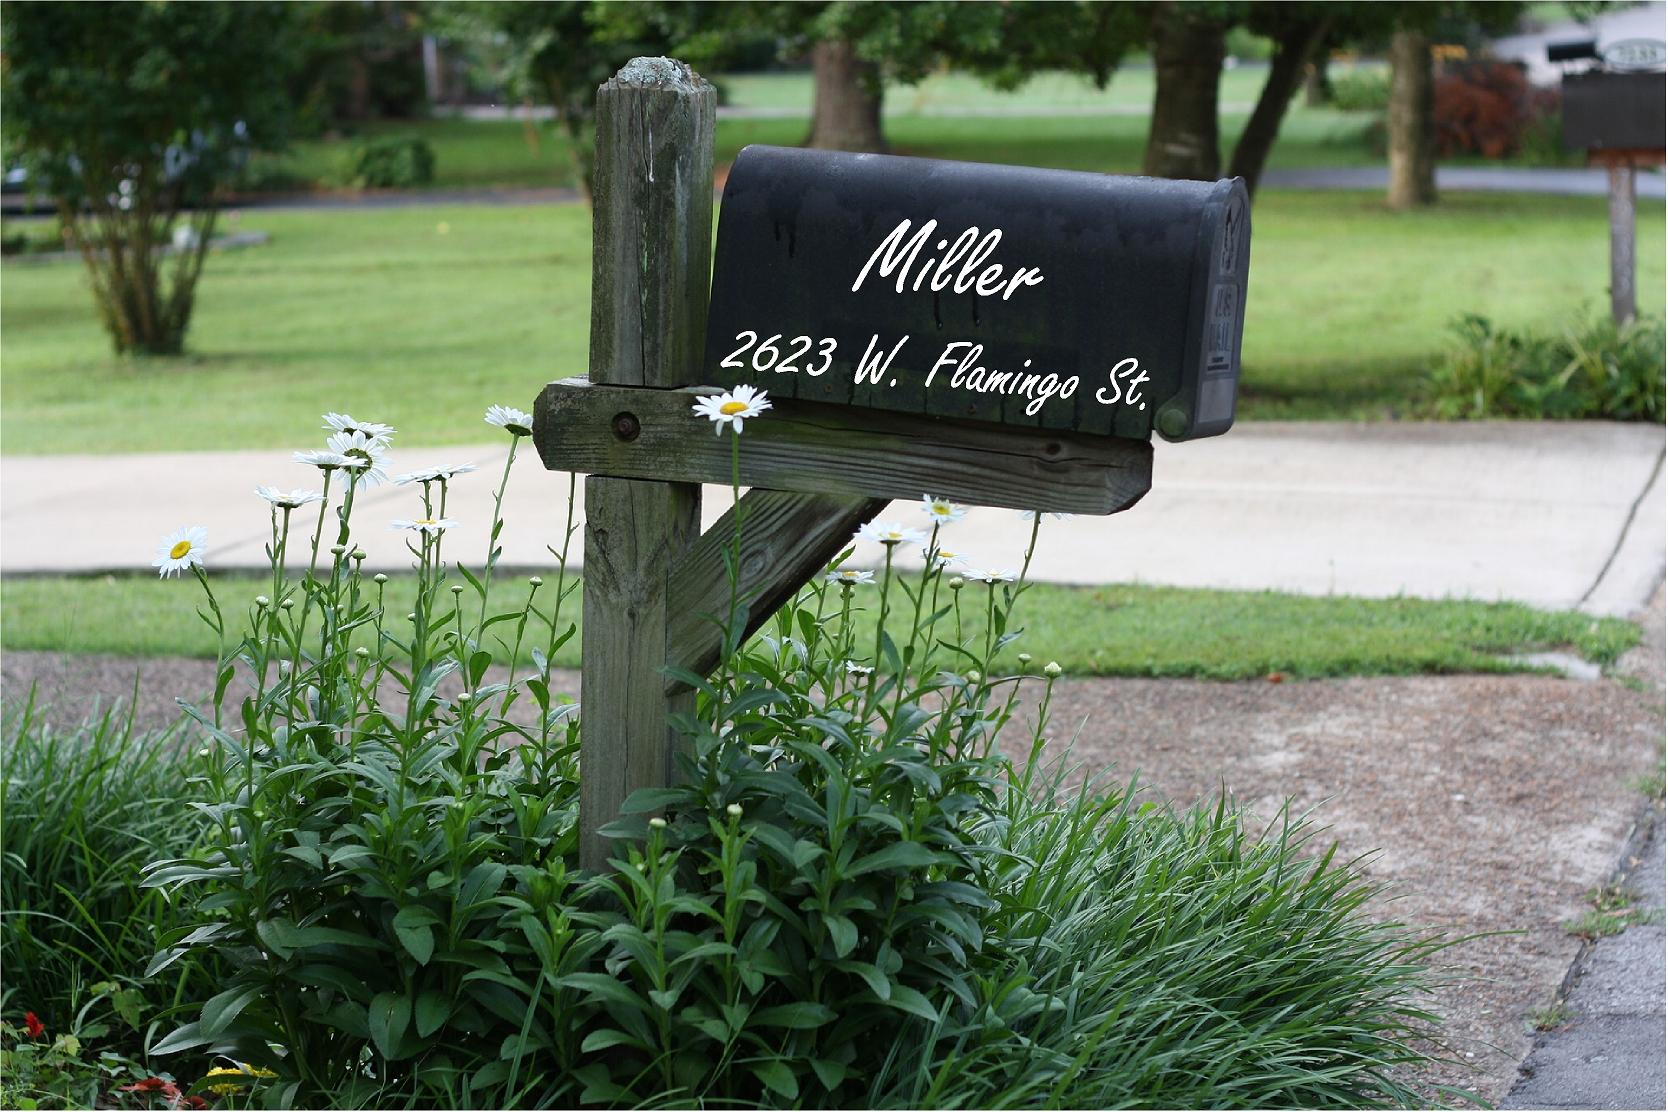 Mailbox name and address vinyl decal